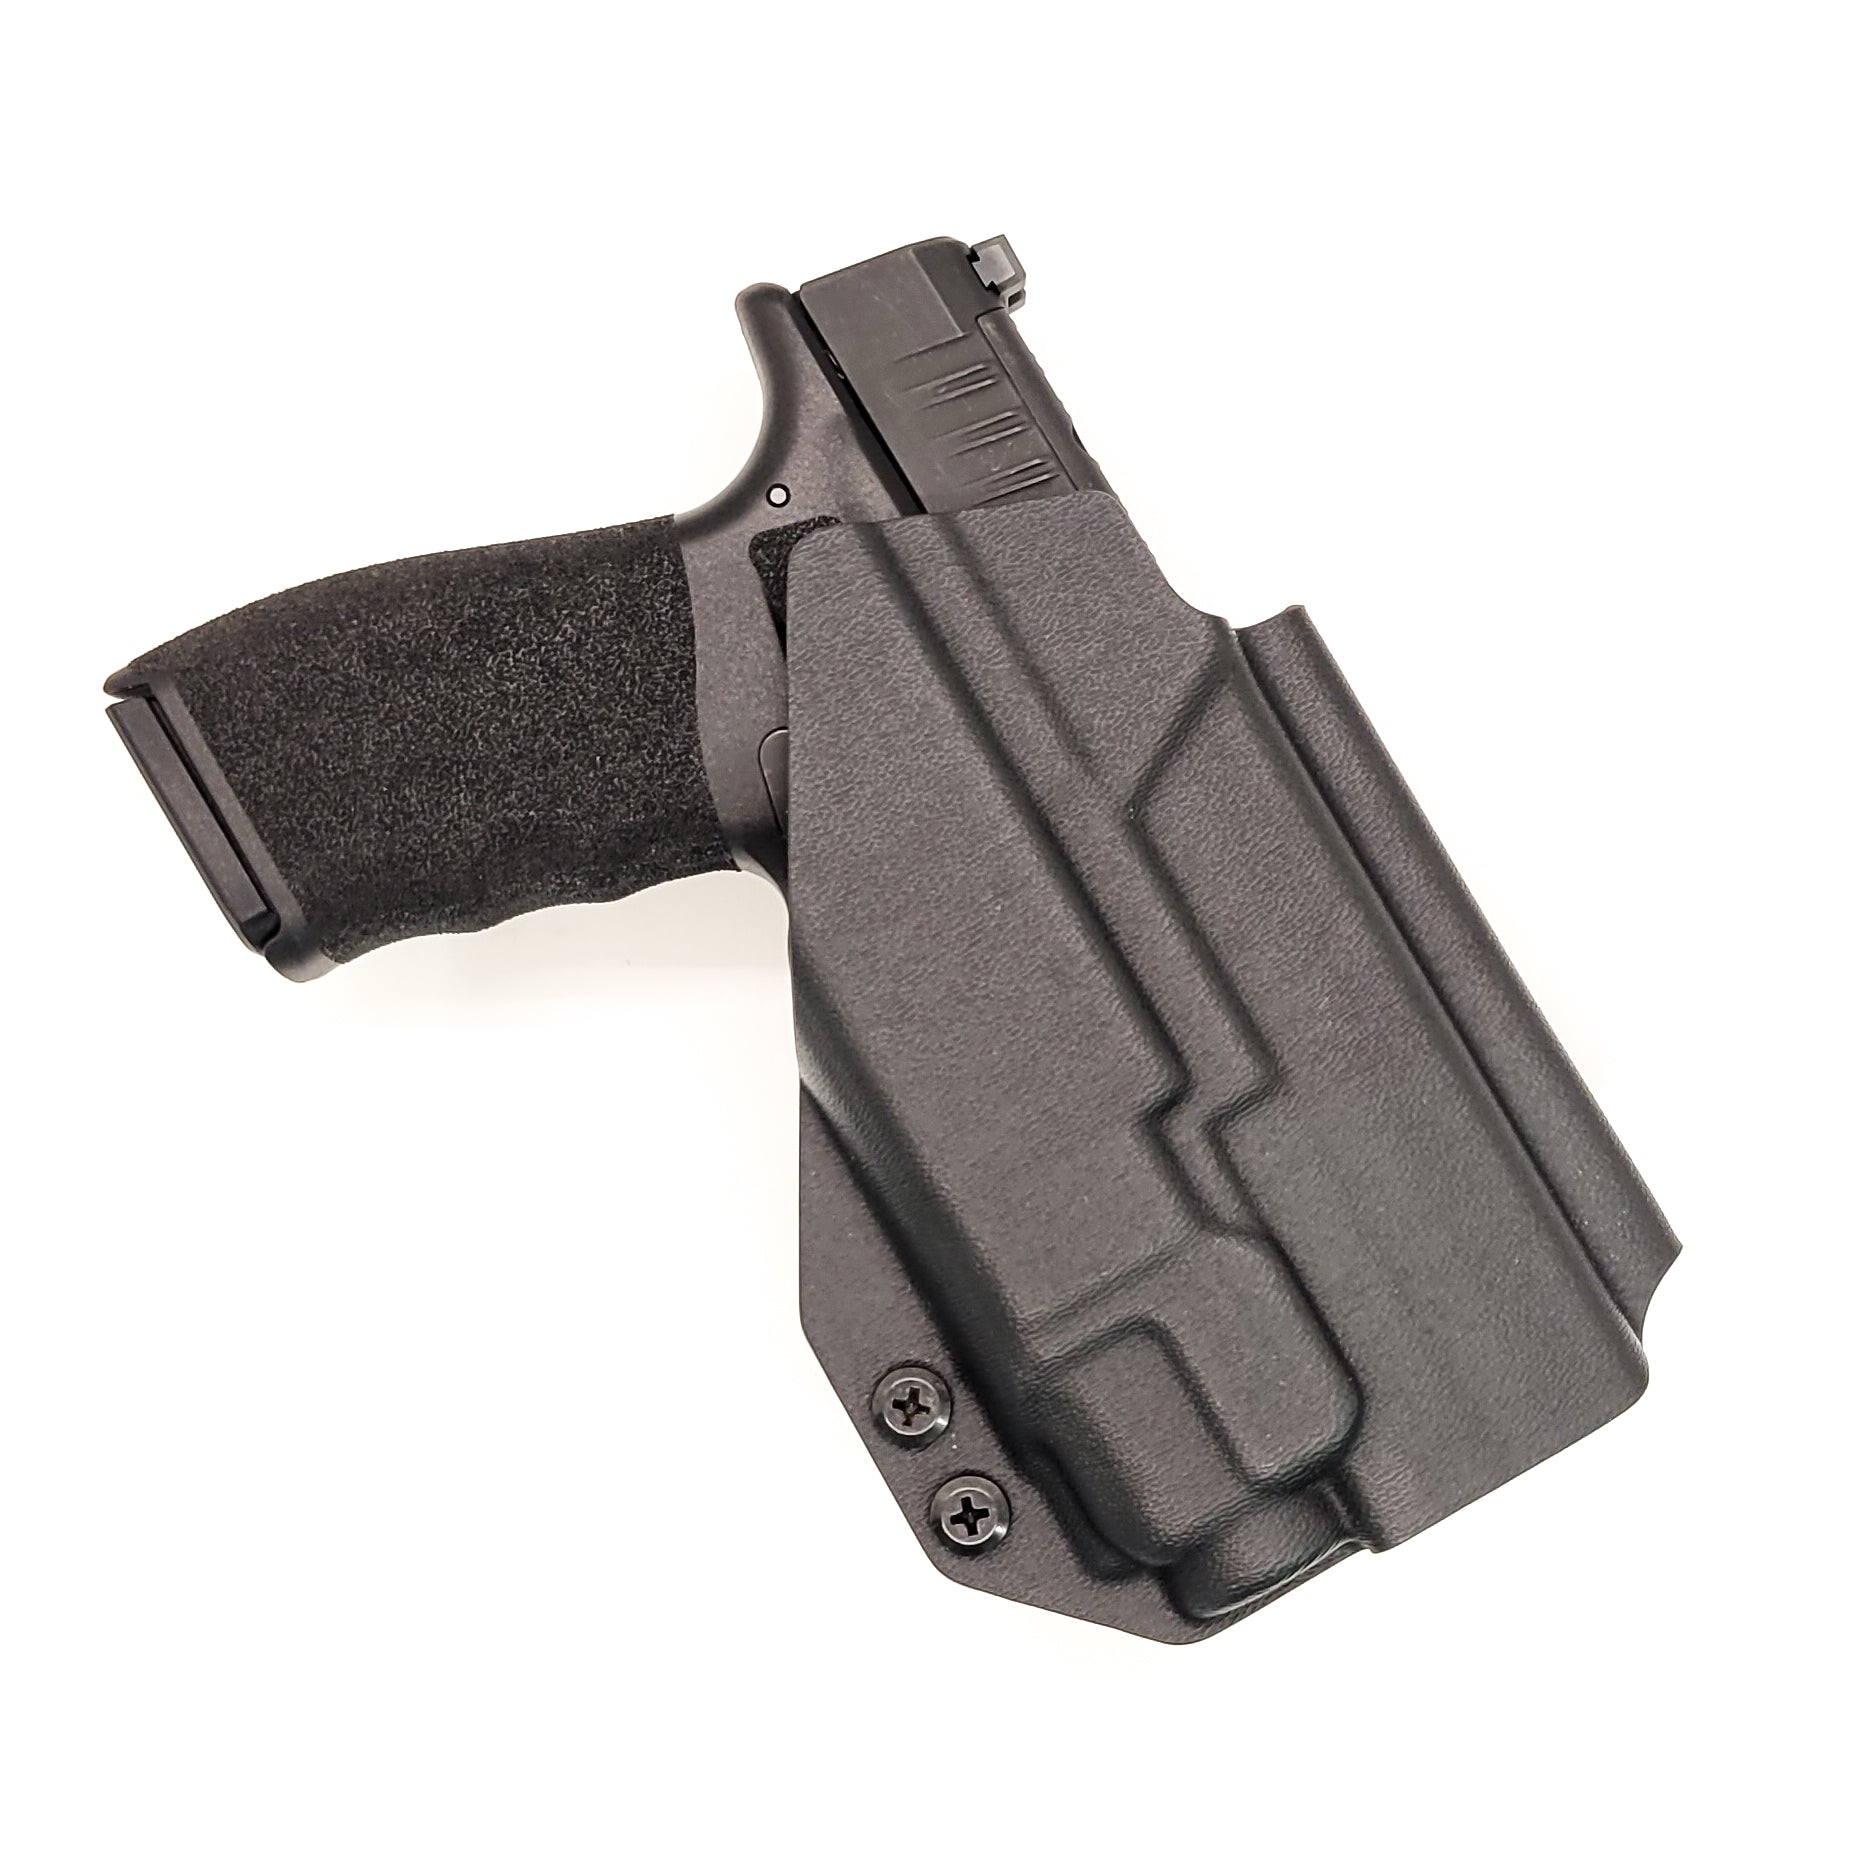 Outside Waistband Holster designed to fit the Springfield Hellcat Pro pistol with the Streamlight TLR-8 & TLR-8A light mounted to the handgun. The holster retention is on the light itself and not the pistol. Full sweat guard, adjustable retention, minimal material, and smooth edges to reduce printing. Made in the USA. 